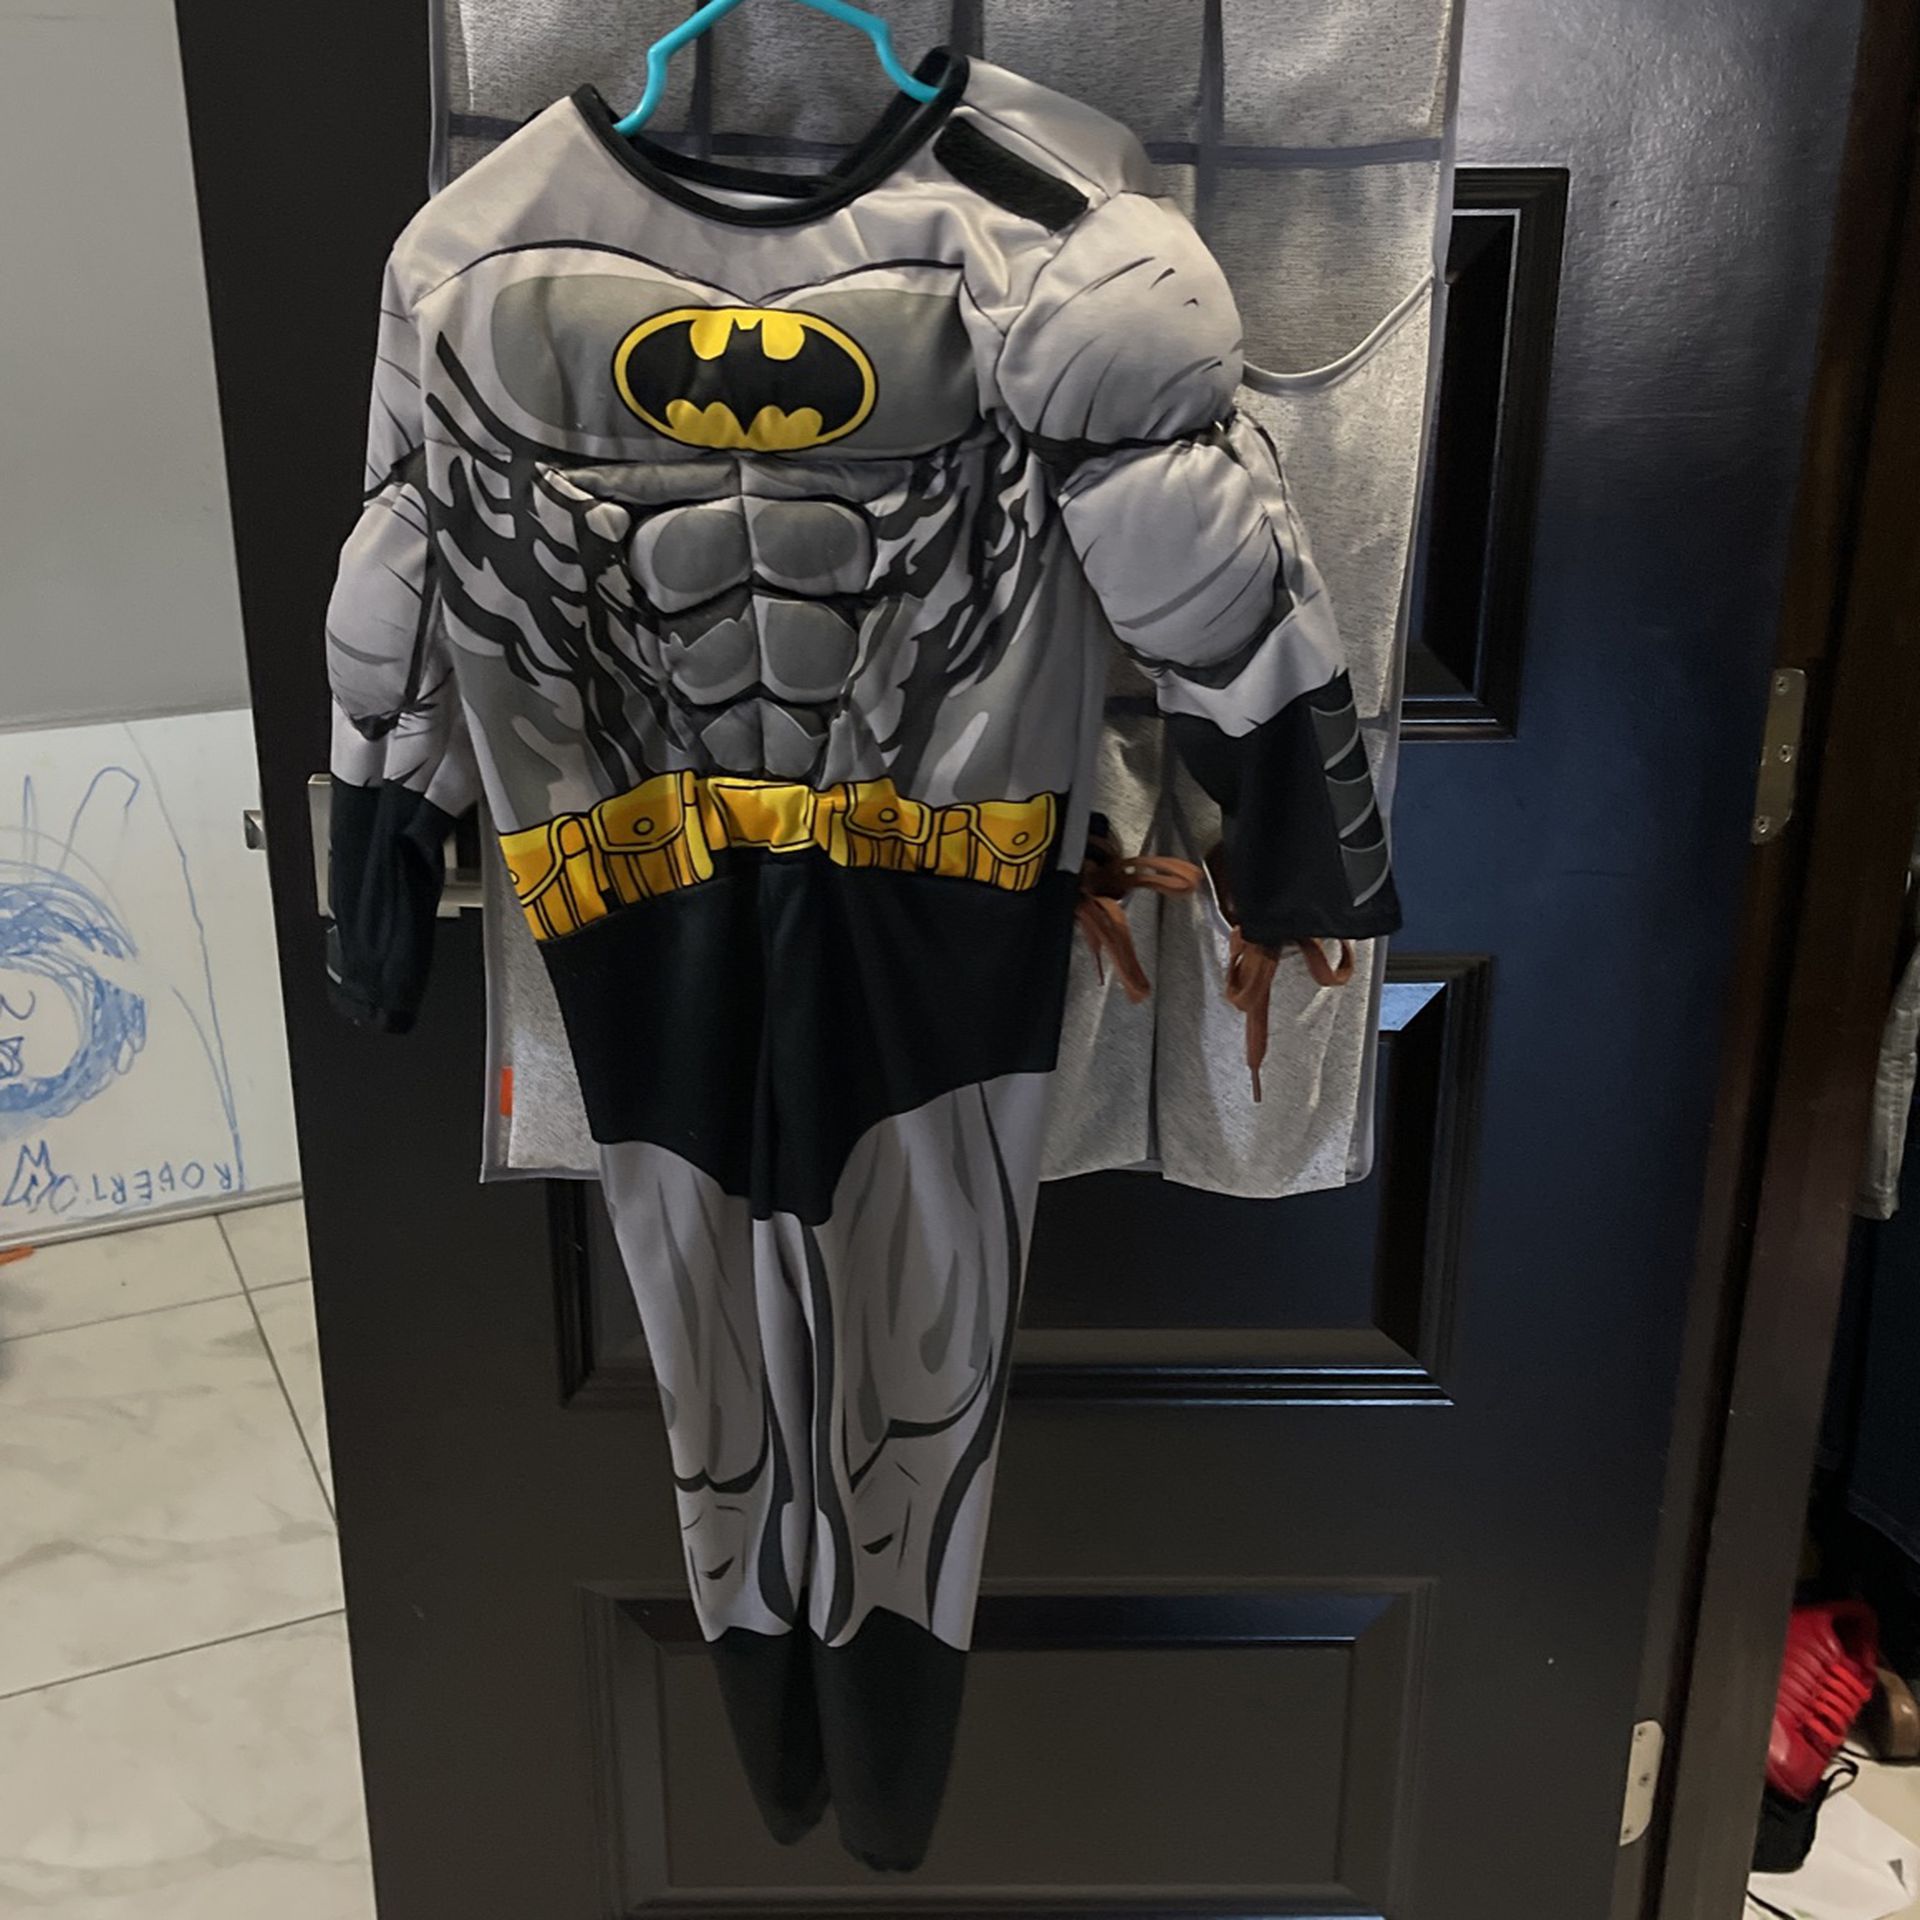  Toddler Batman Costume With Cape 